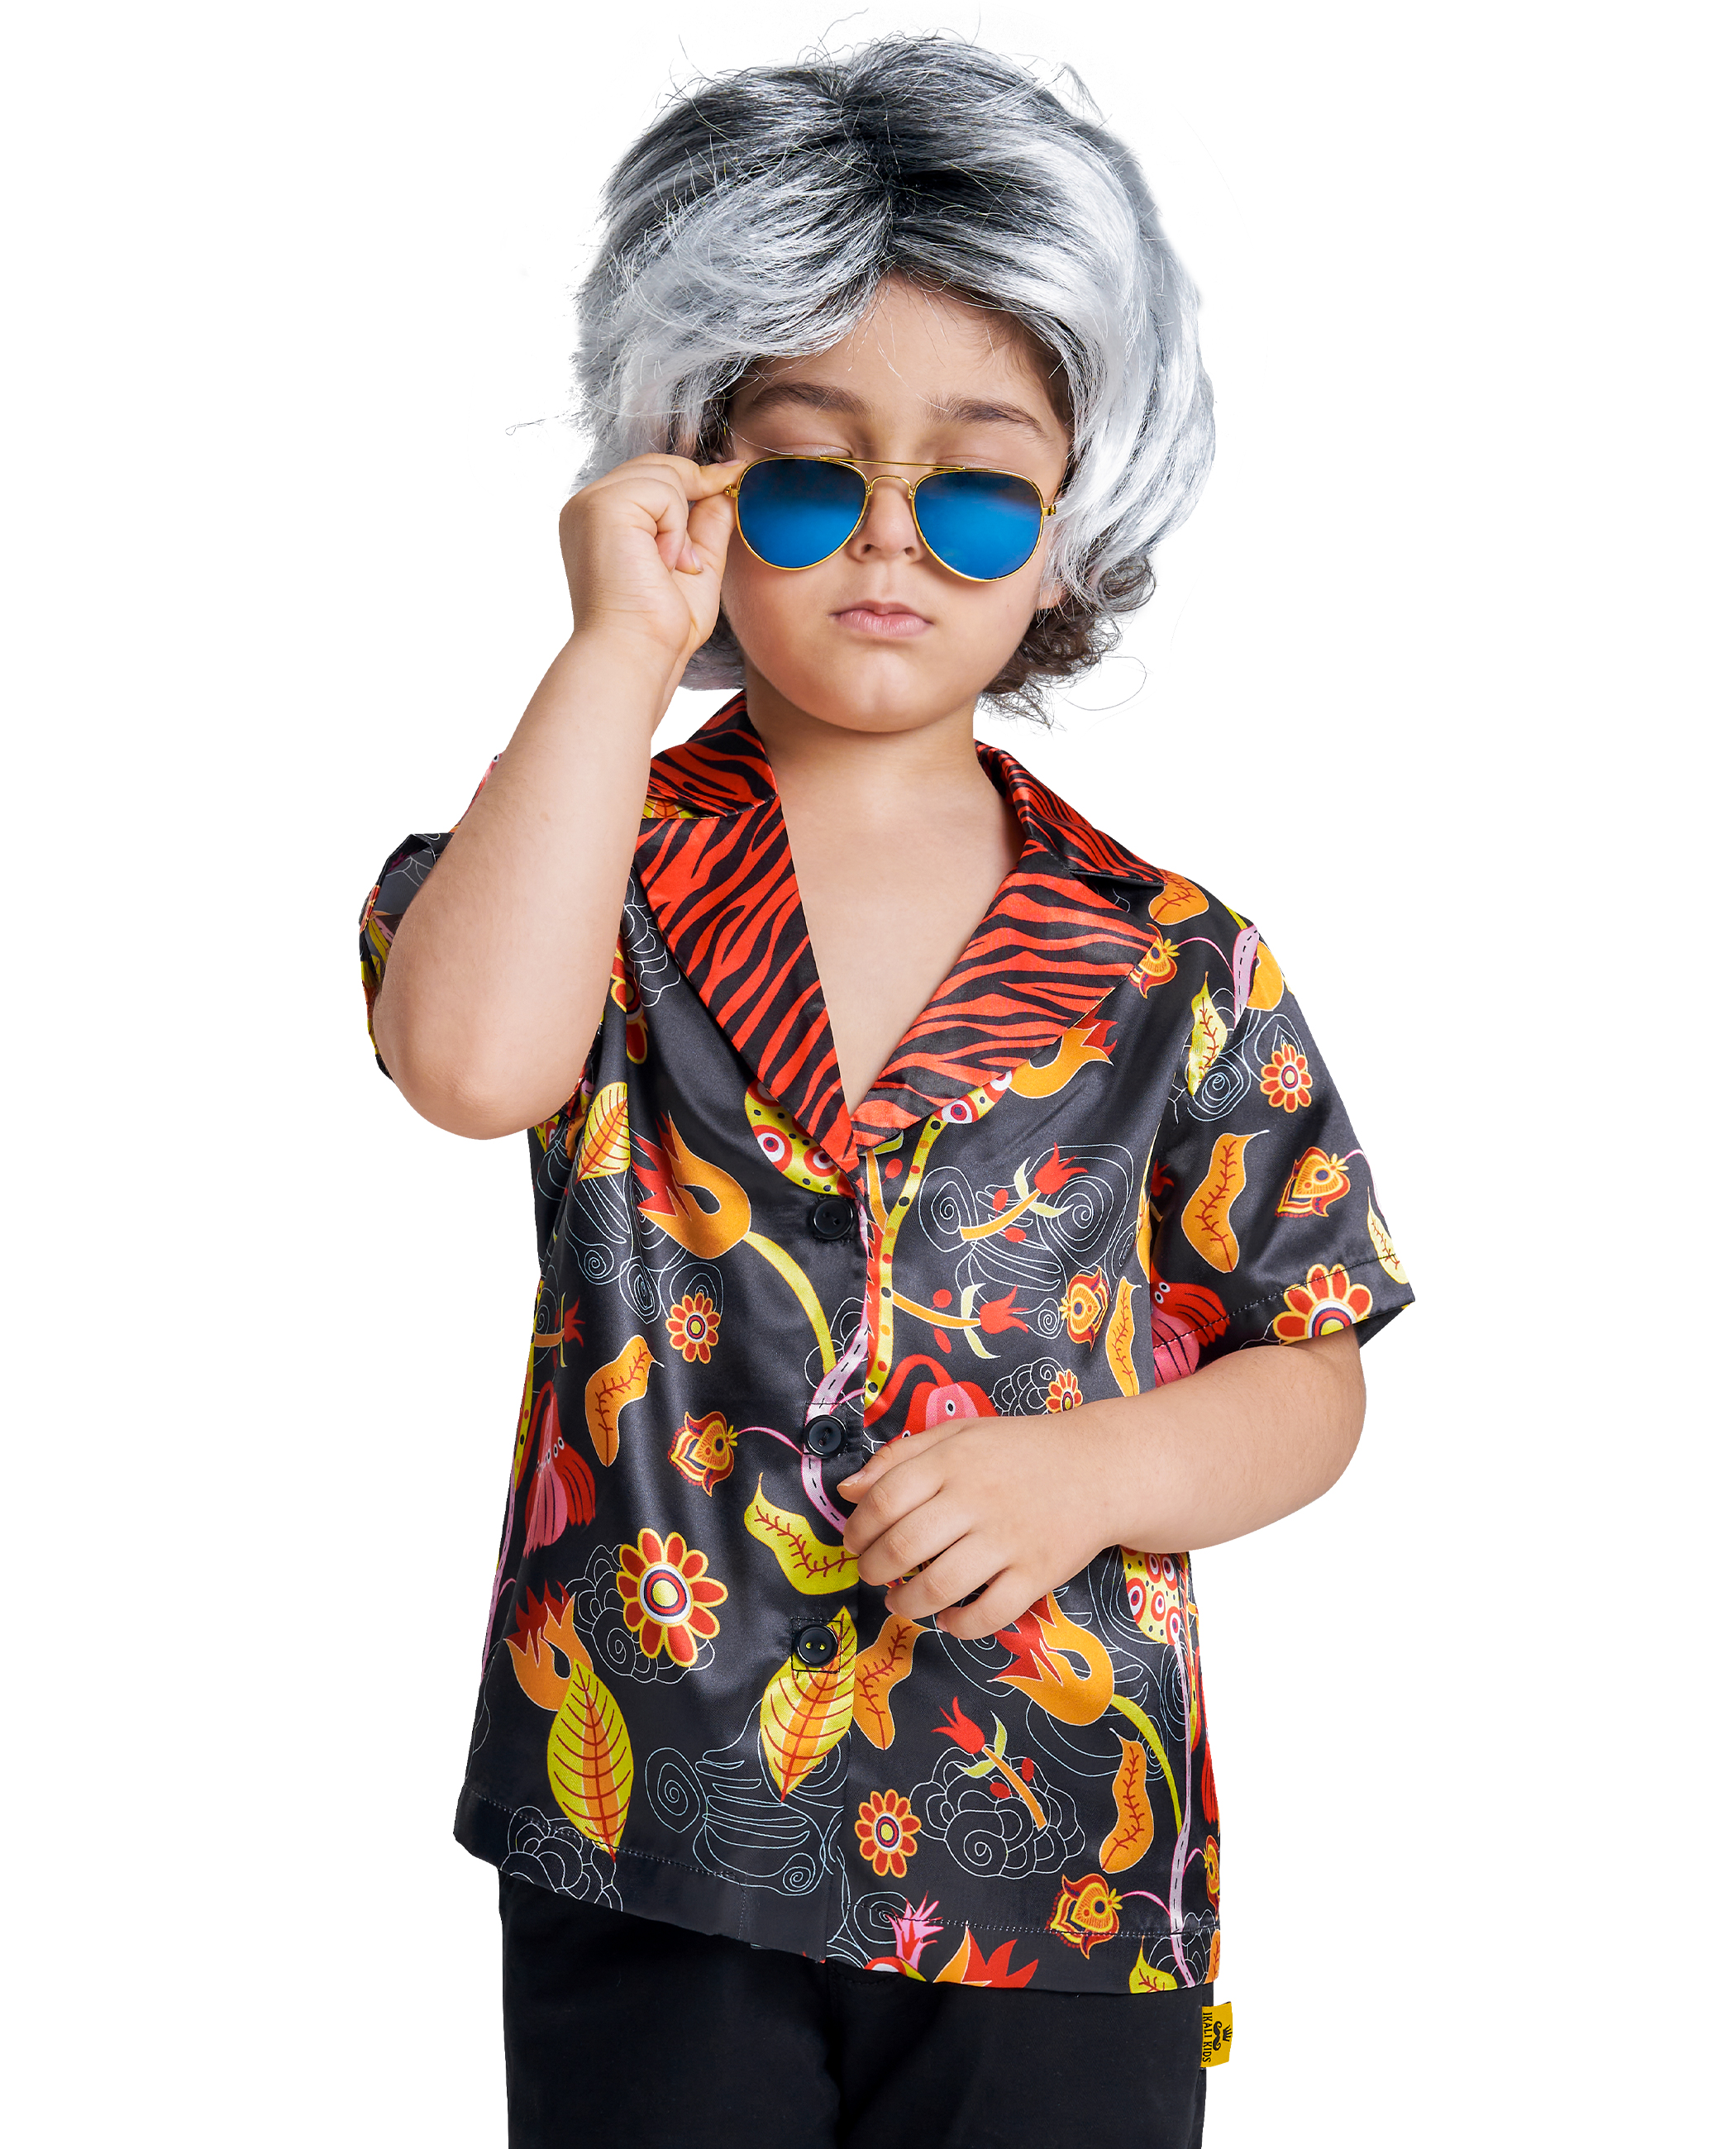 100th day of school dress up ideas